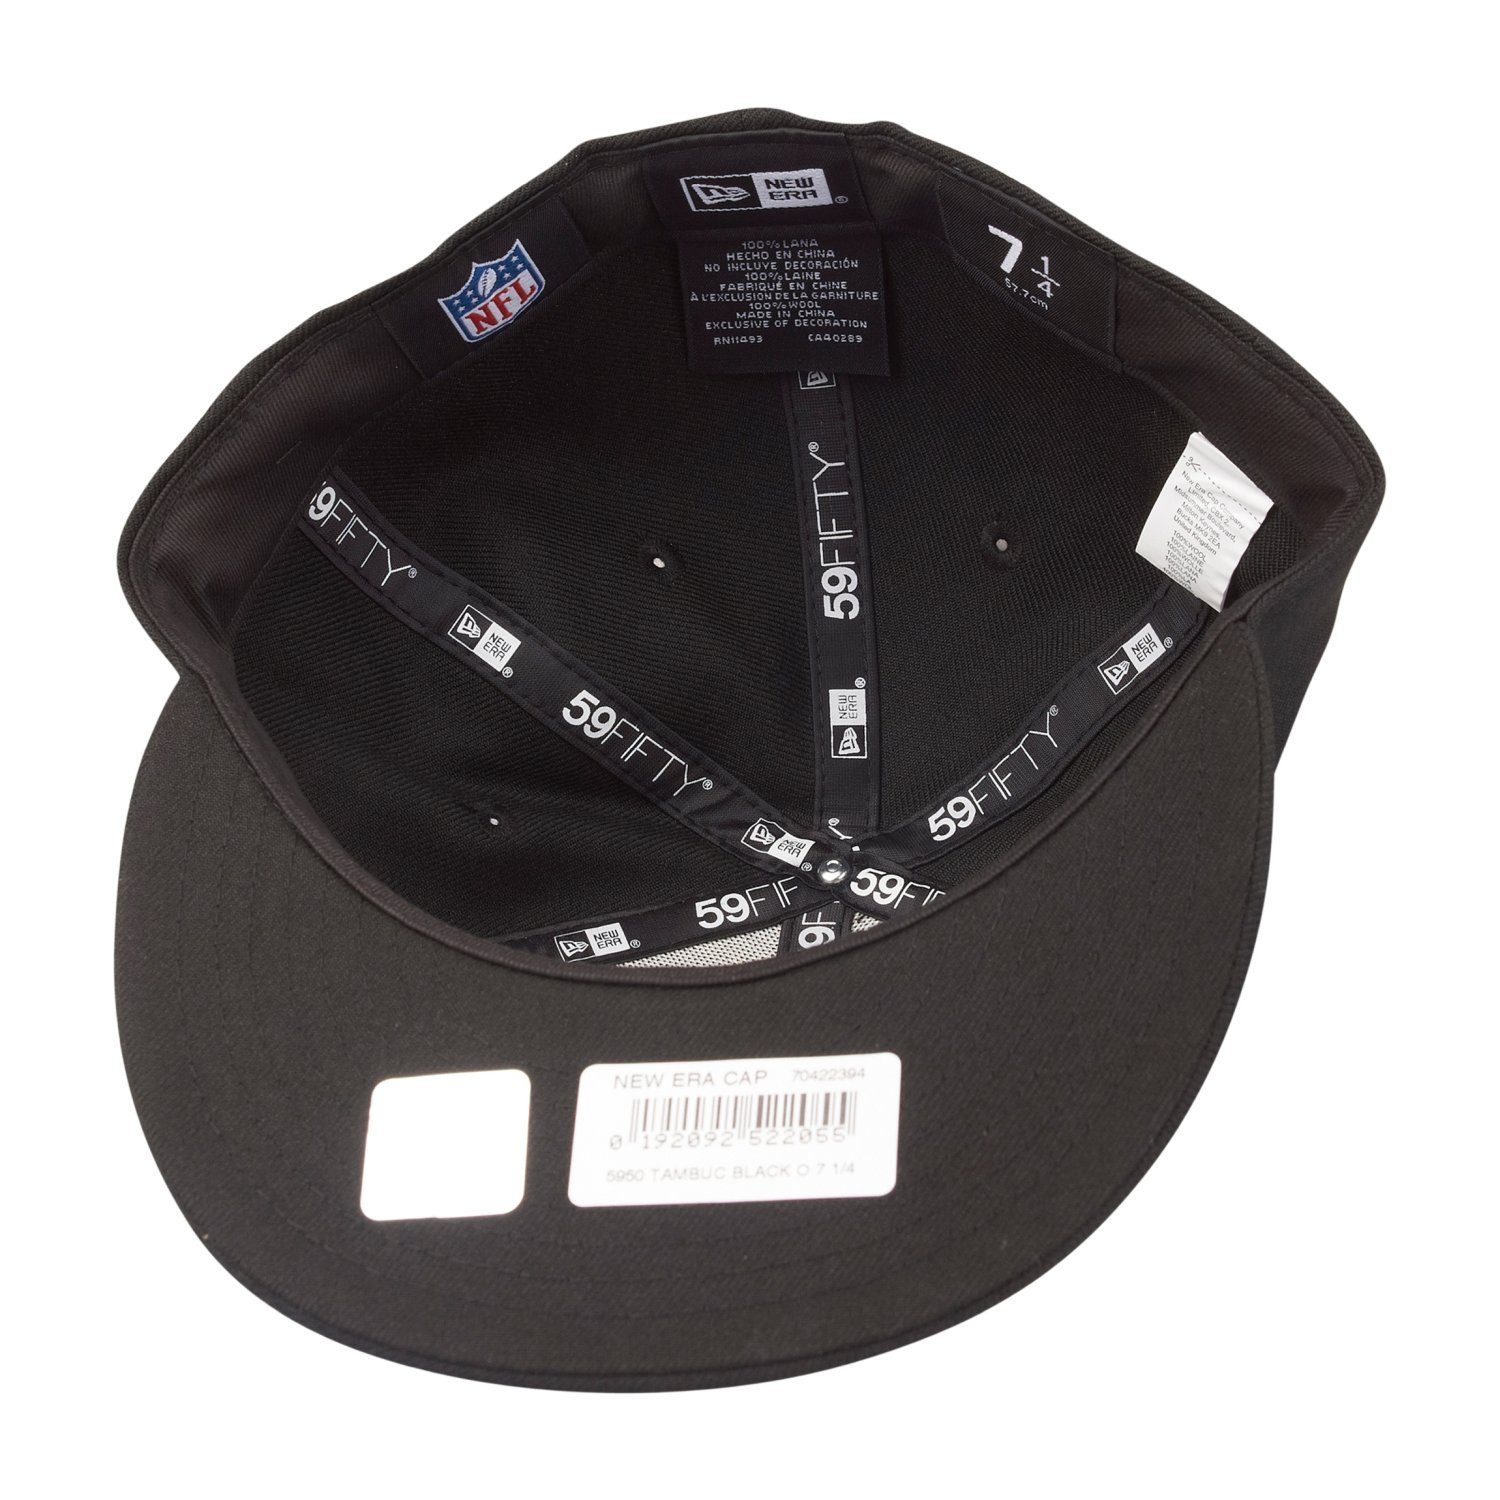 Cap NFL Tampa Era Buccaneers 59Fifty Fitted New Bay